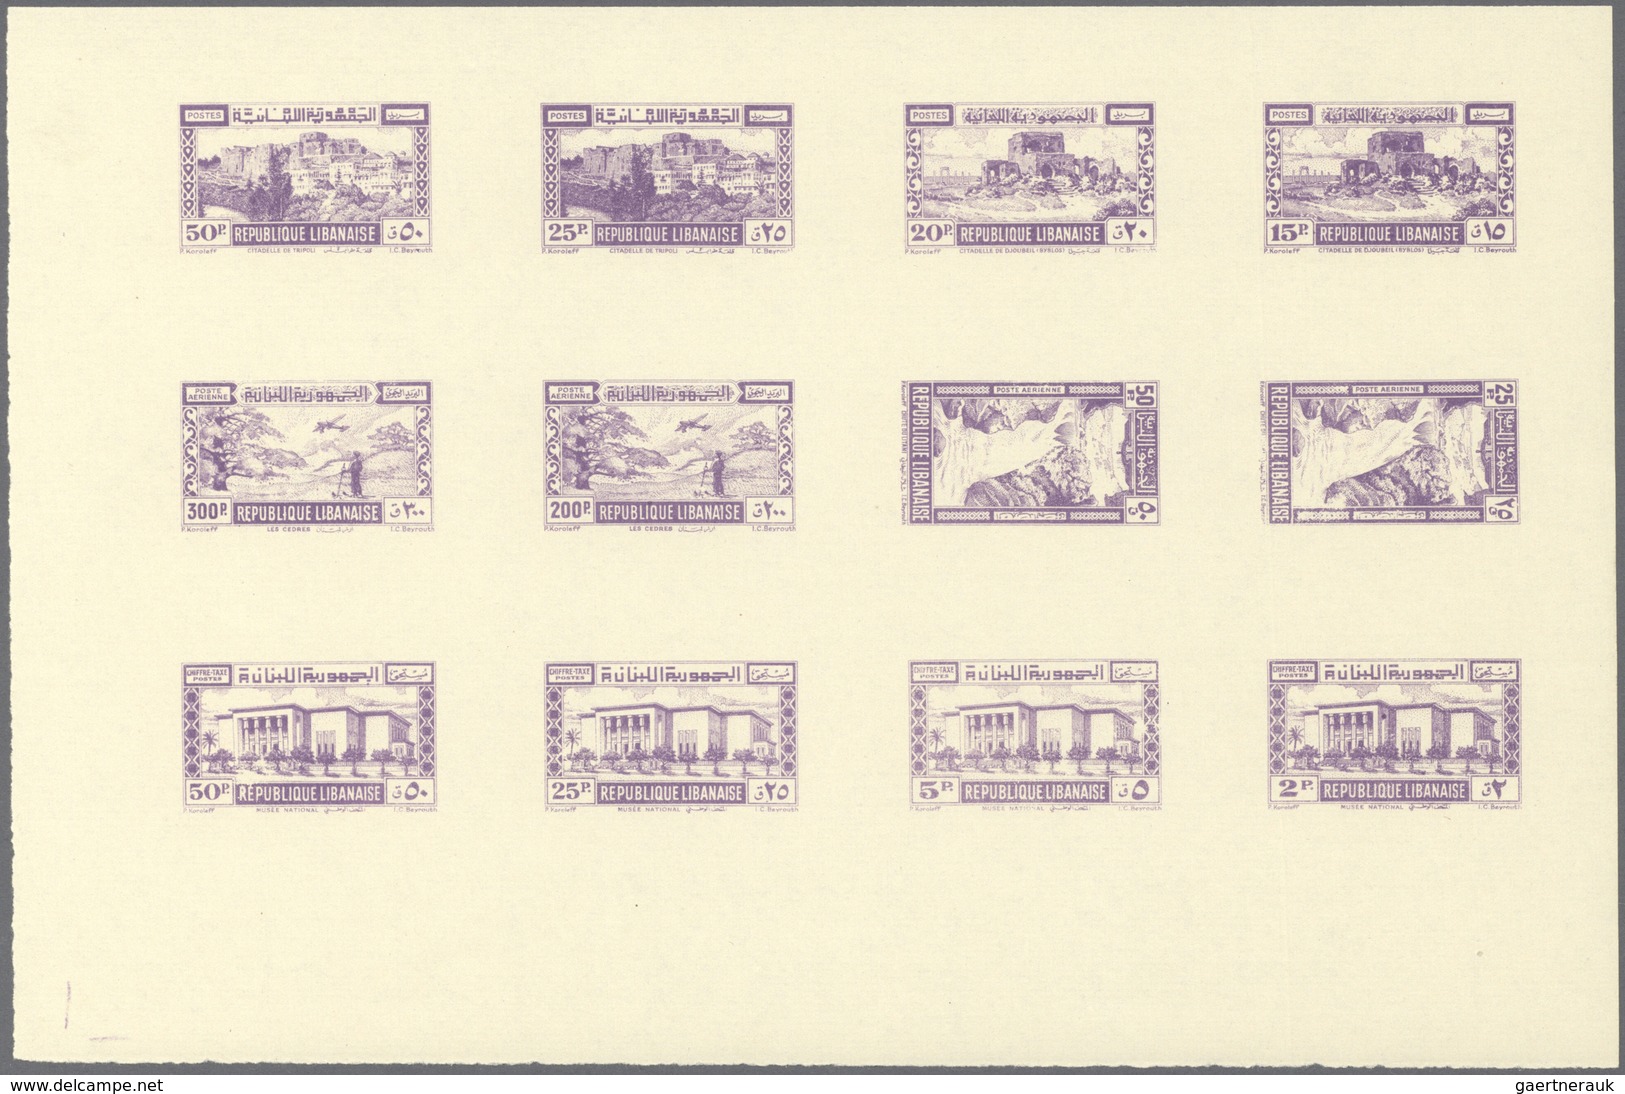 Libanon: 1945, Definitives, Airmails And Postage Dues, Combined Proof Sheet In Violet On Gummed Pape - Libanon